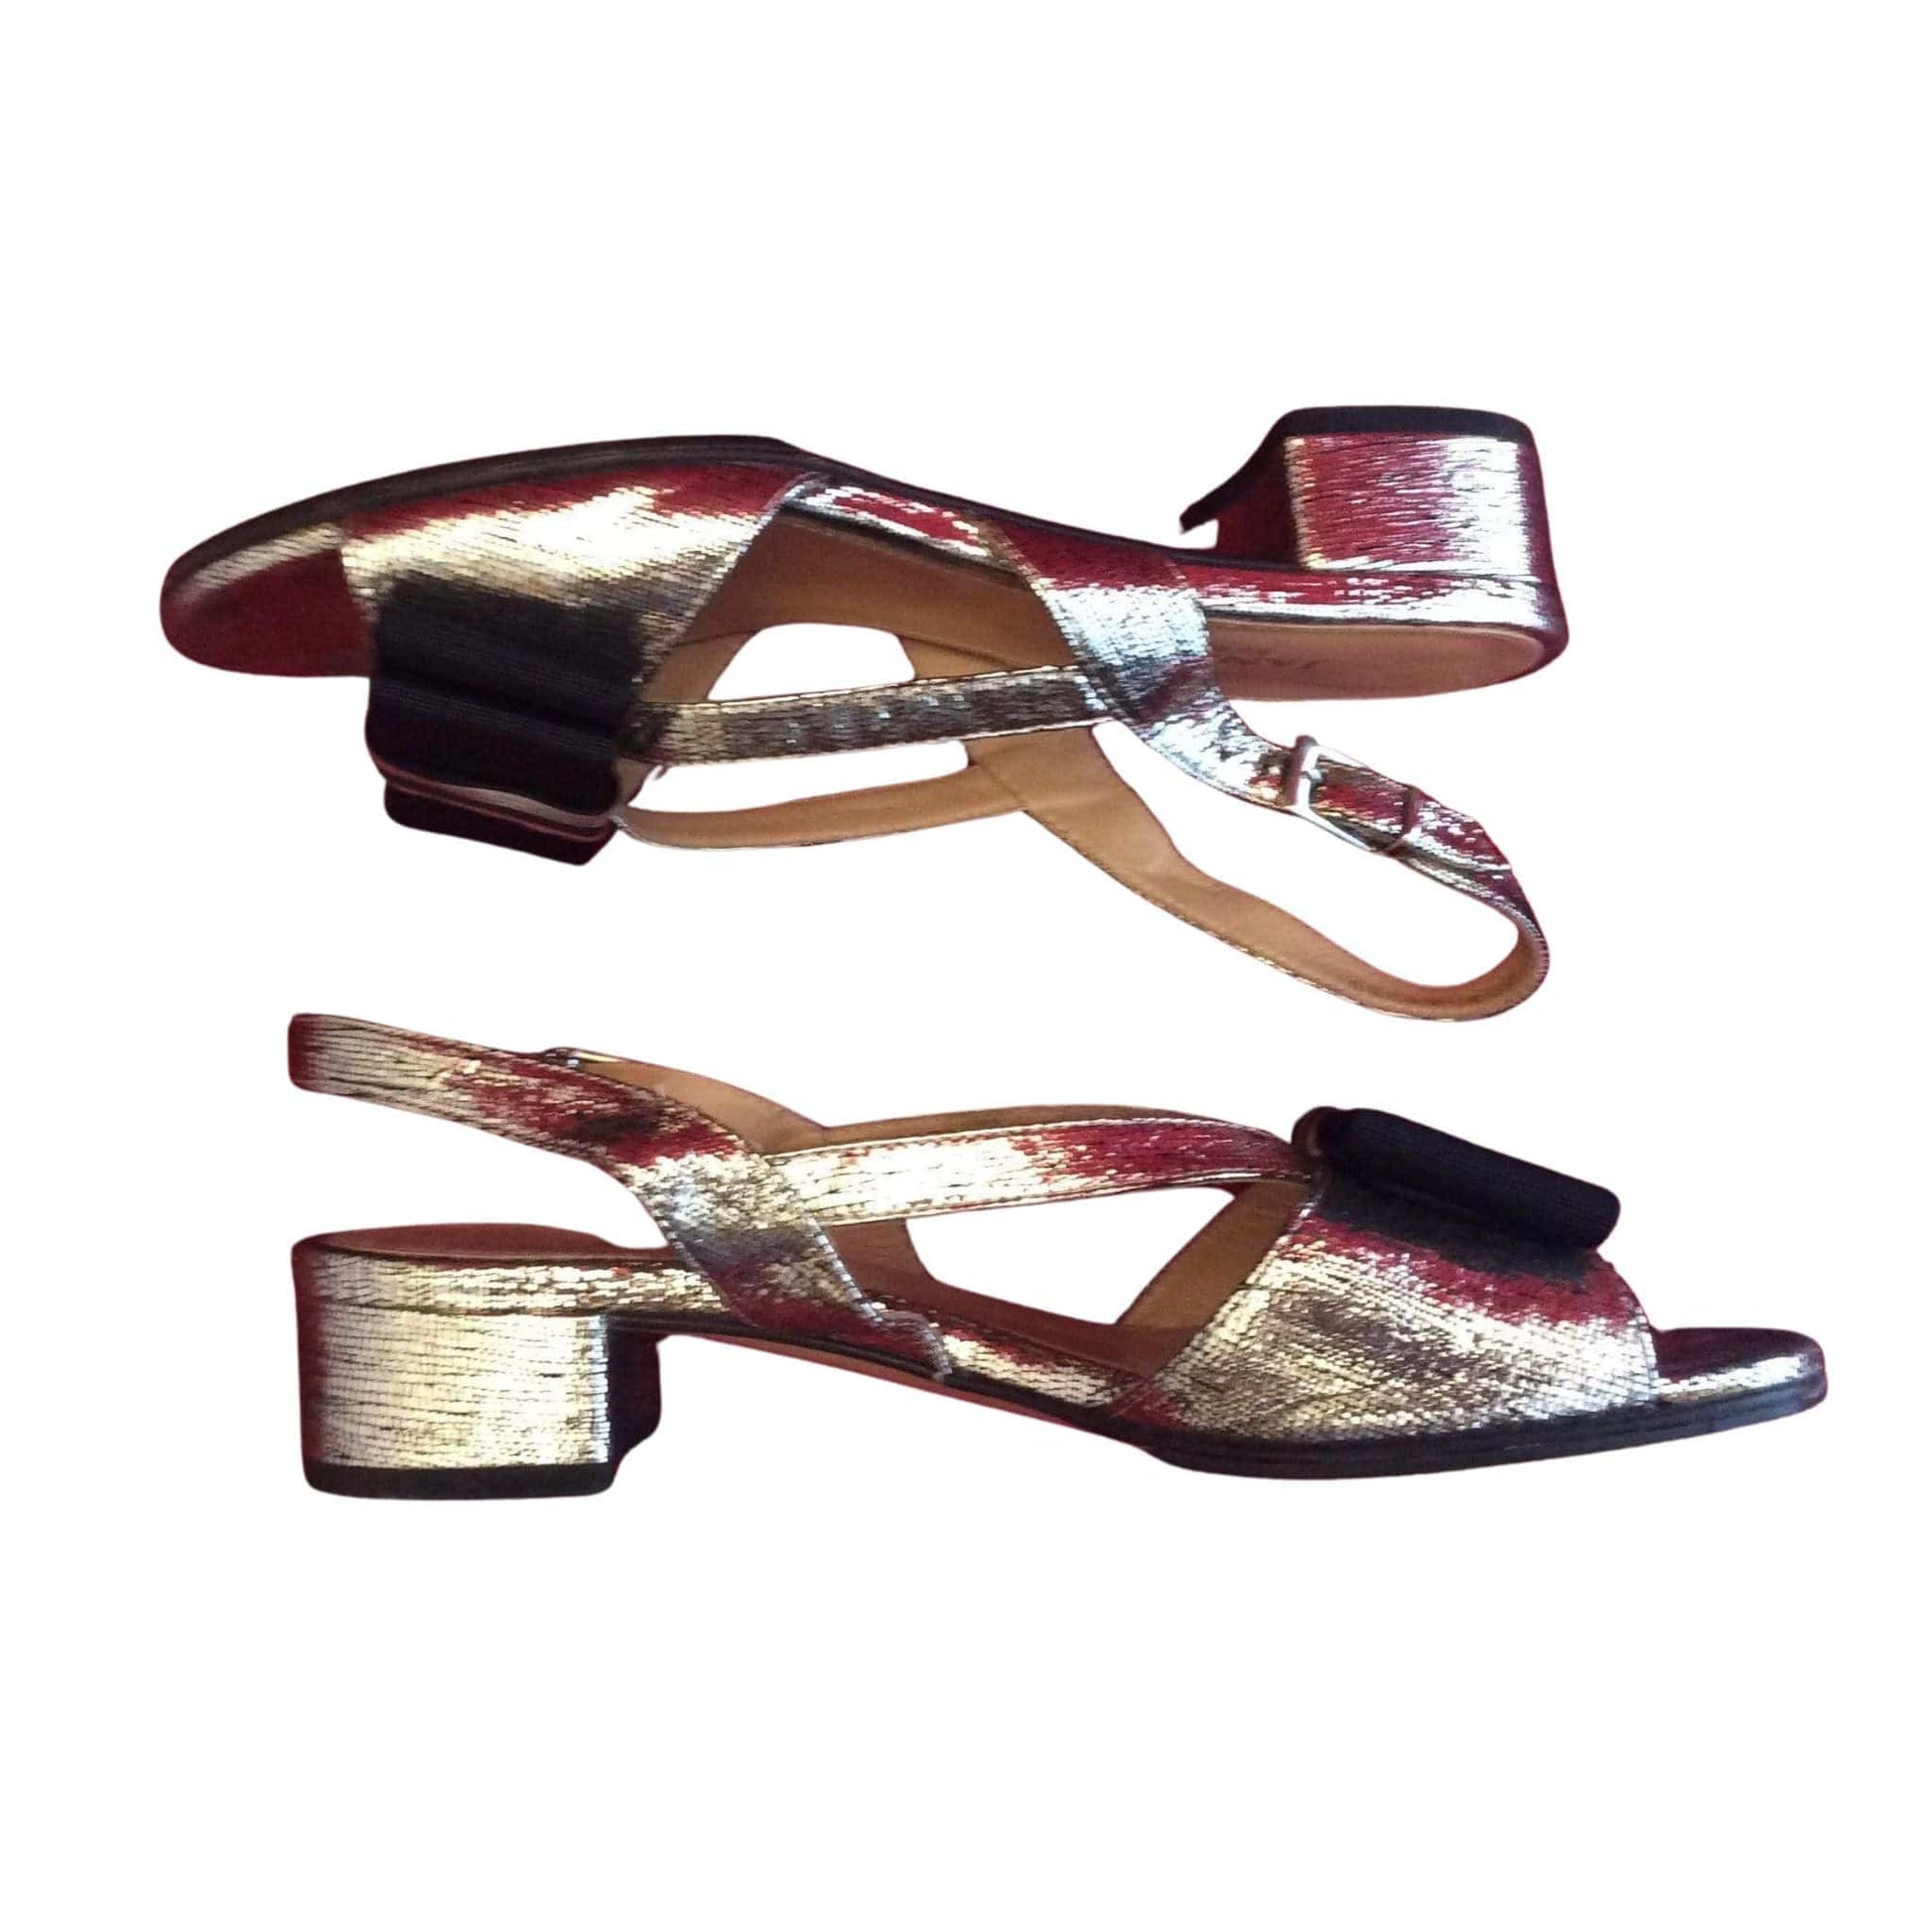 Jane Mox by Righi Sandals 8.5 / Silver / Vintage 1990s